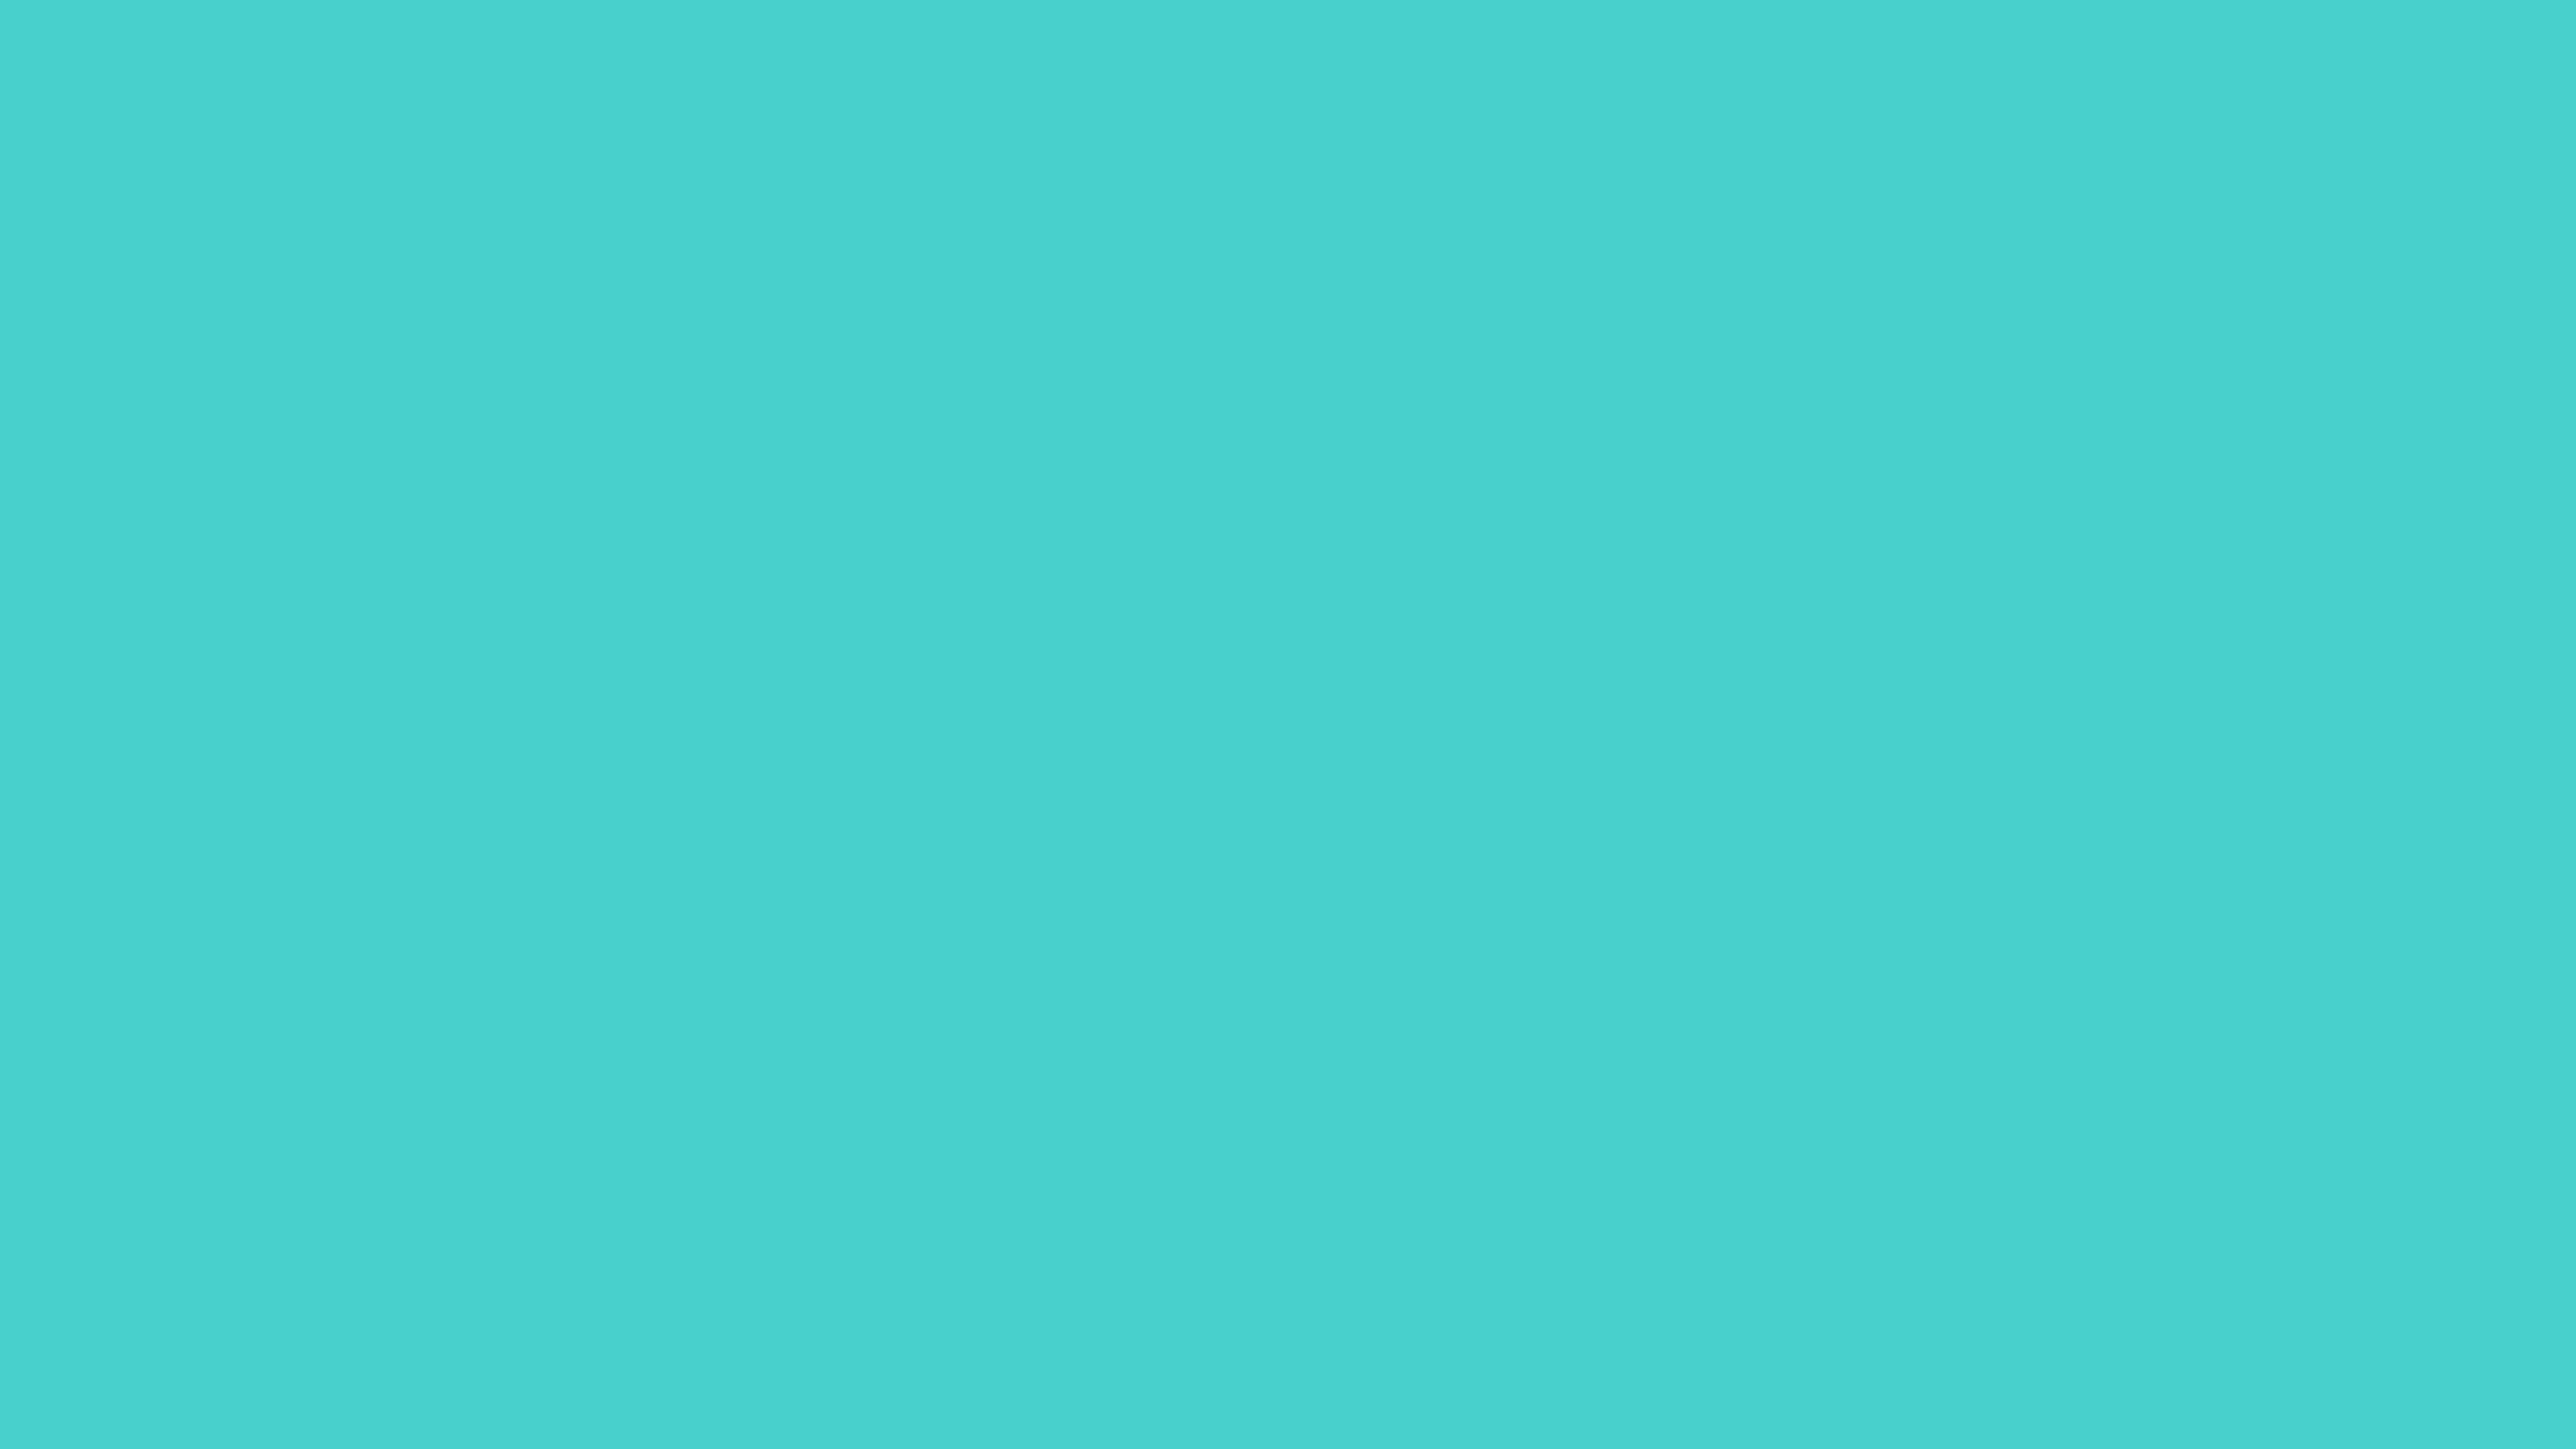 5120x2880 Medium Turquoise Solid Color Background